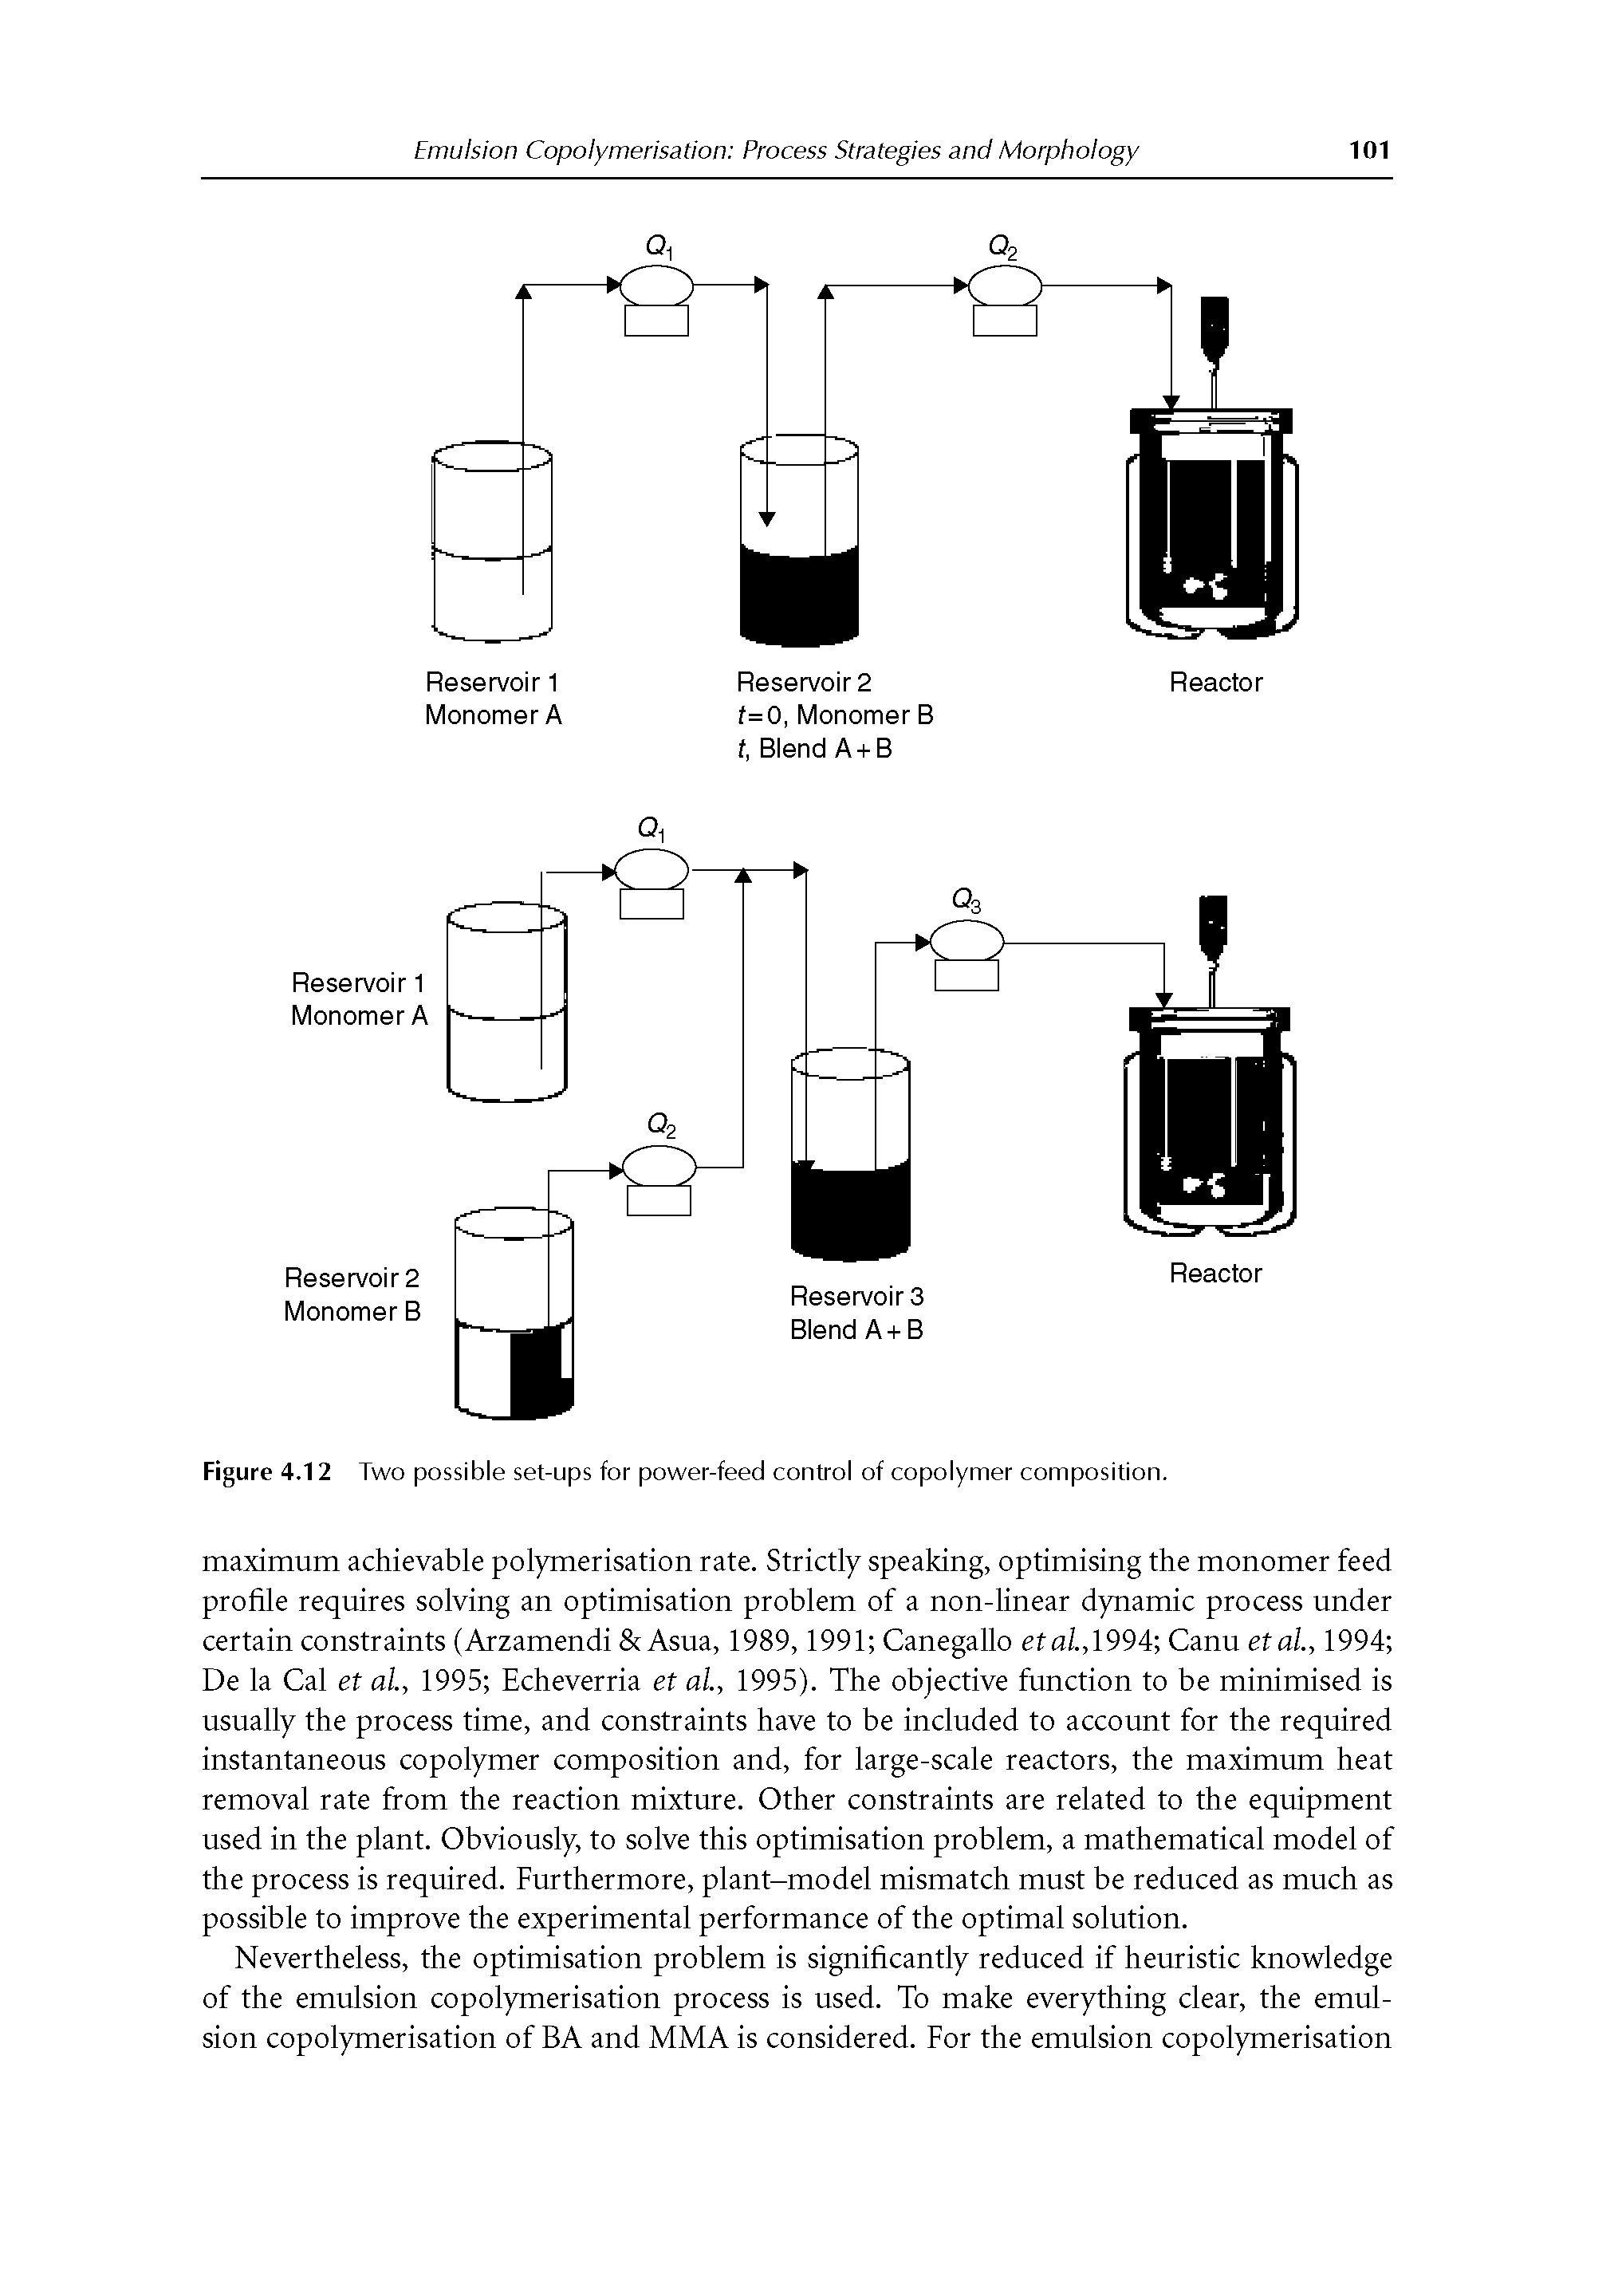 Figure 4.12 Two possible set-ups for power-feed control of copolymer composition.